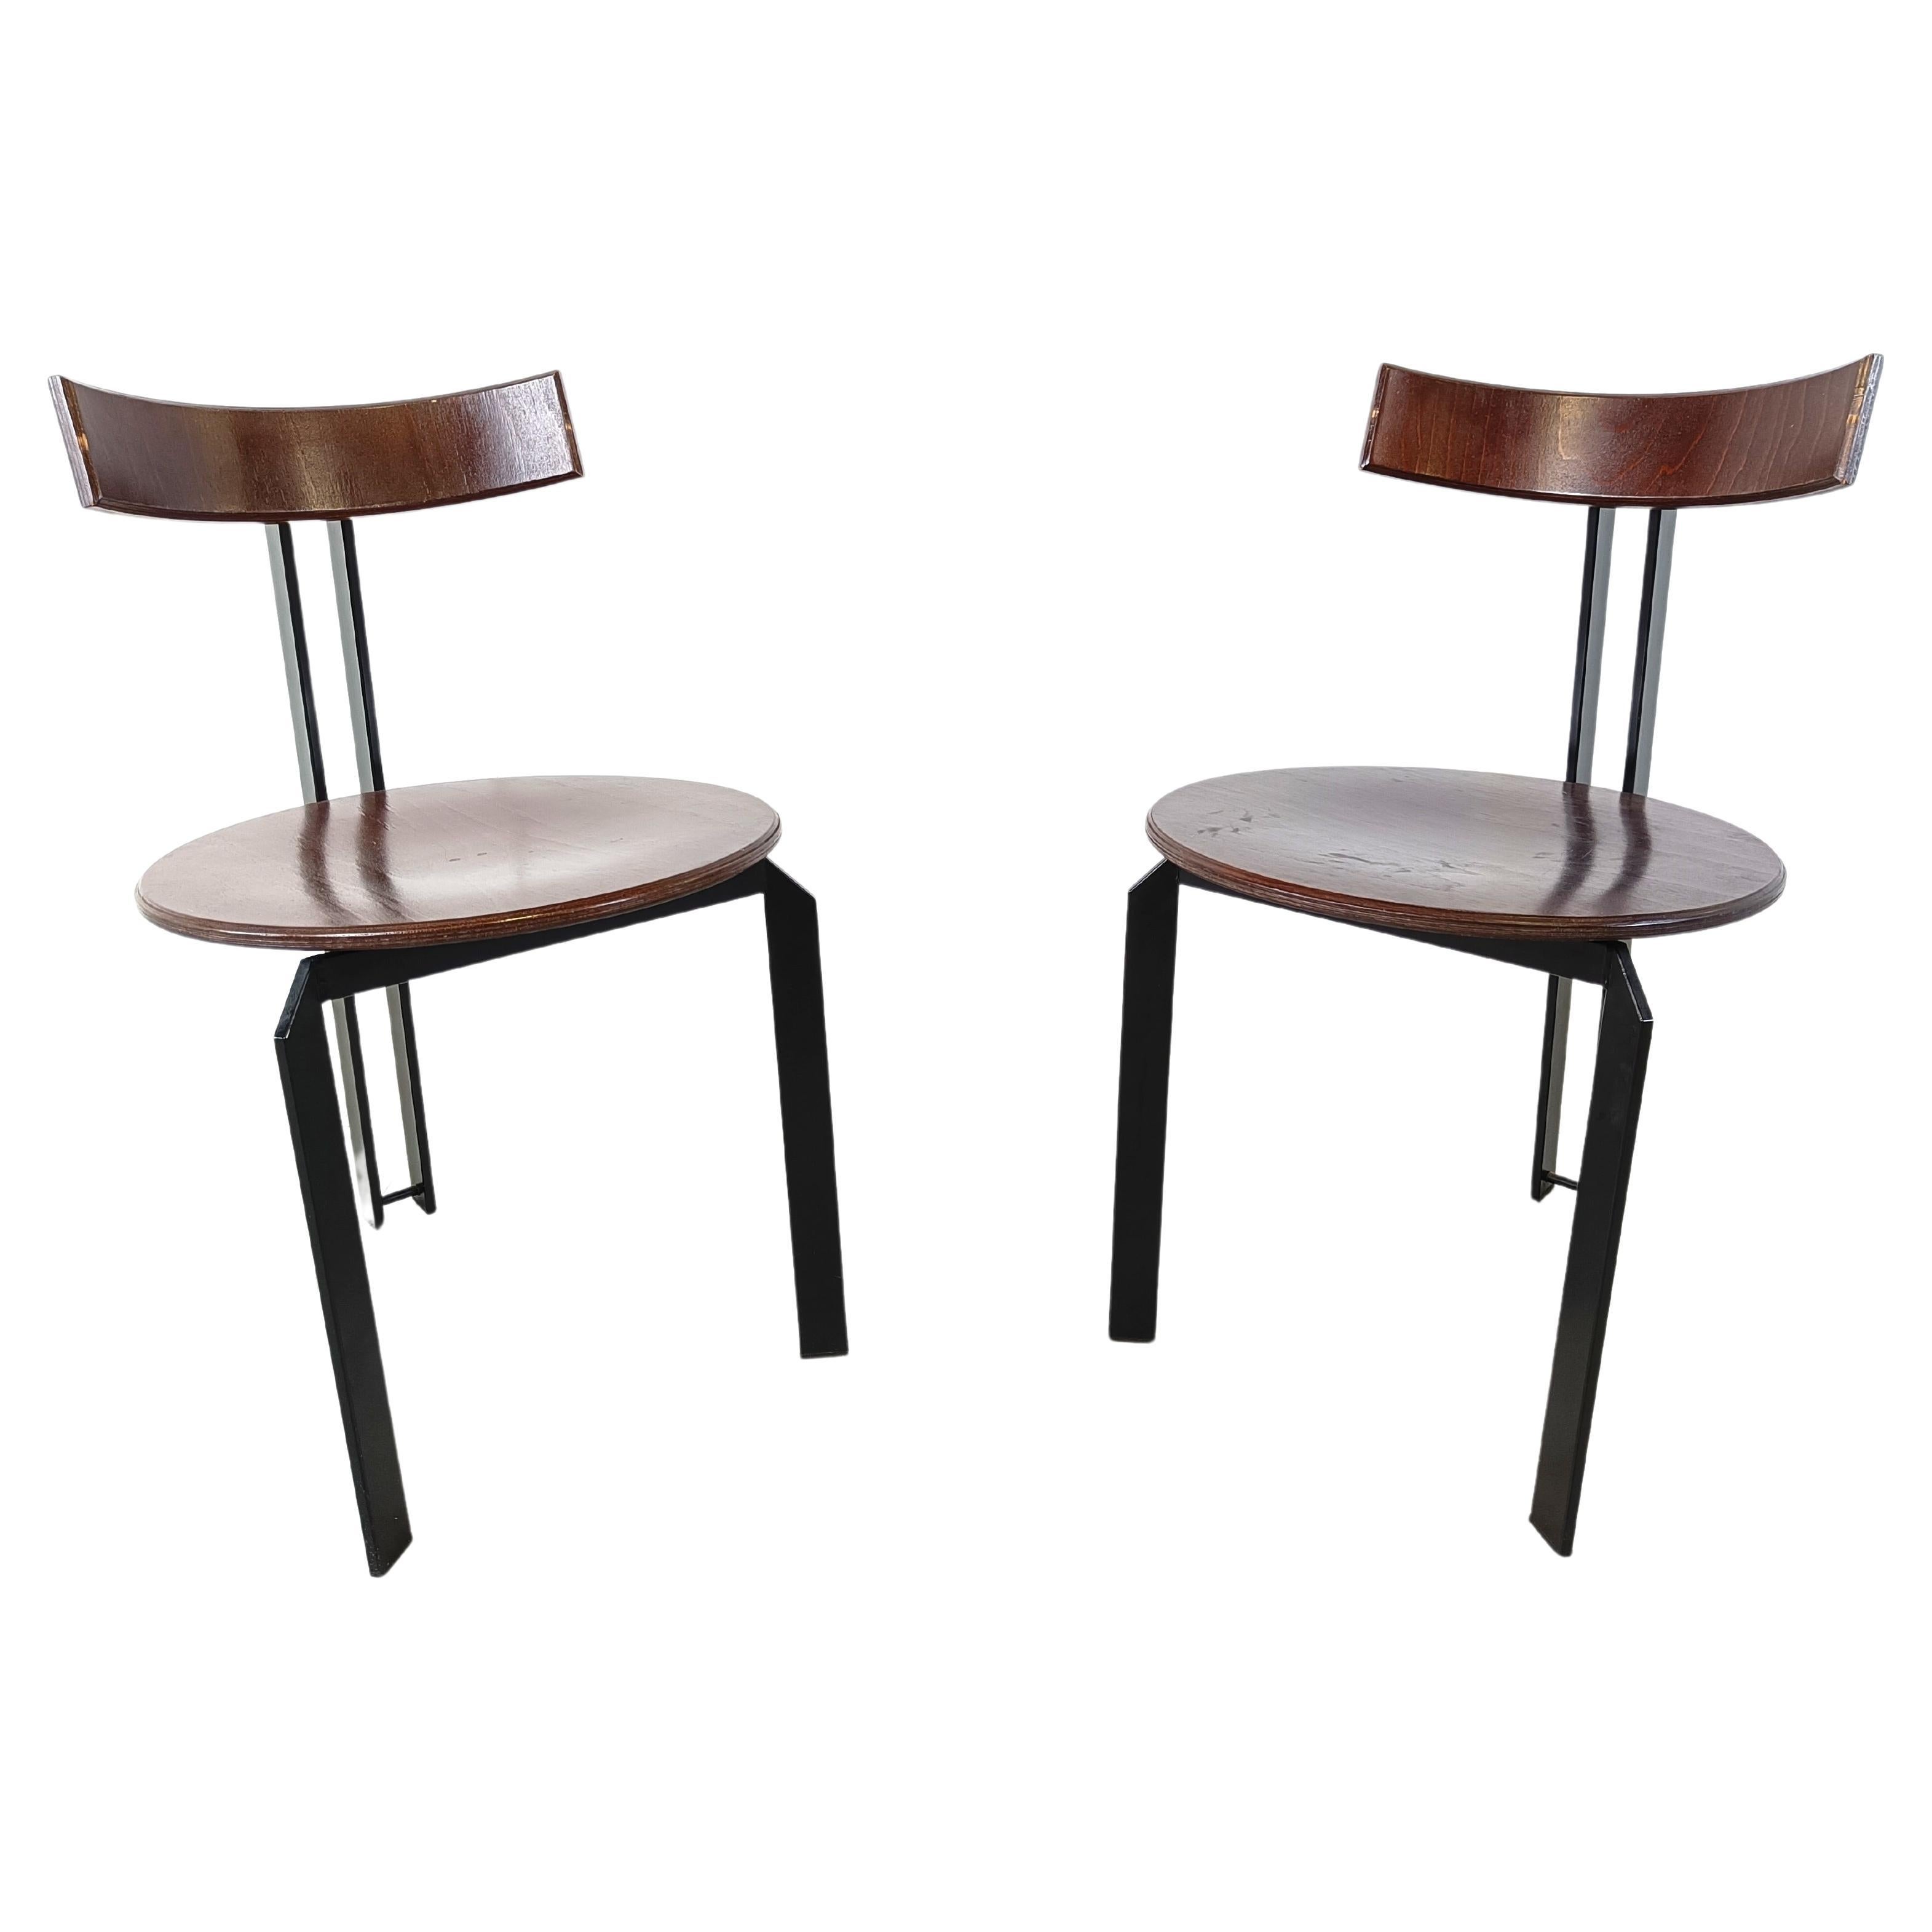 Post modern Zeta dining chairs by Martin Haksteen for Harvink, 1980s For Sale